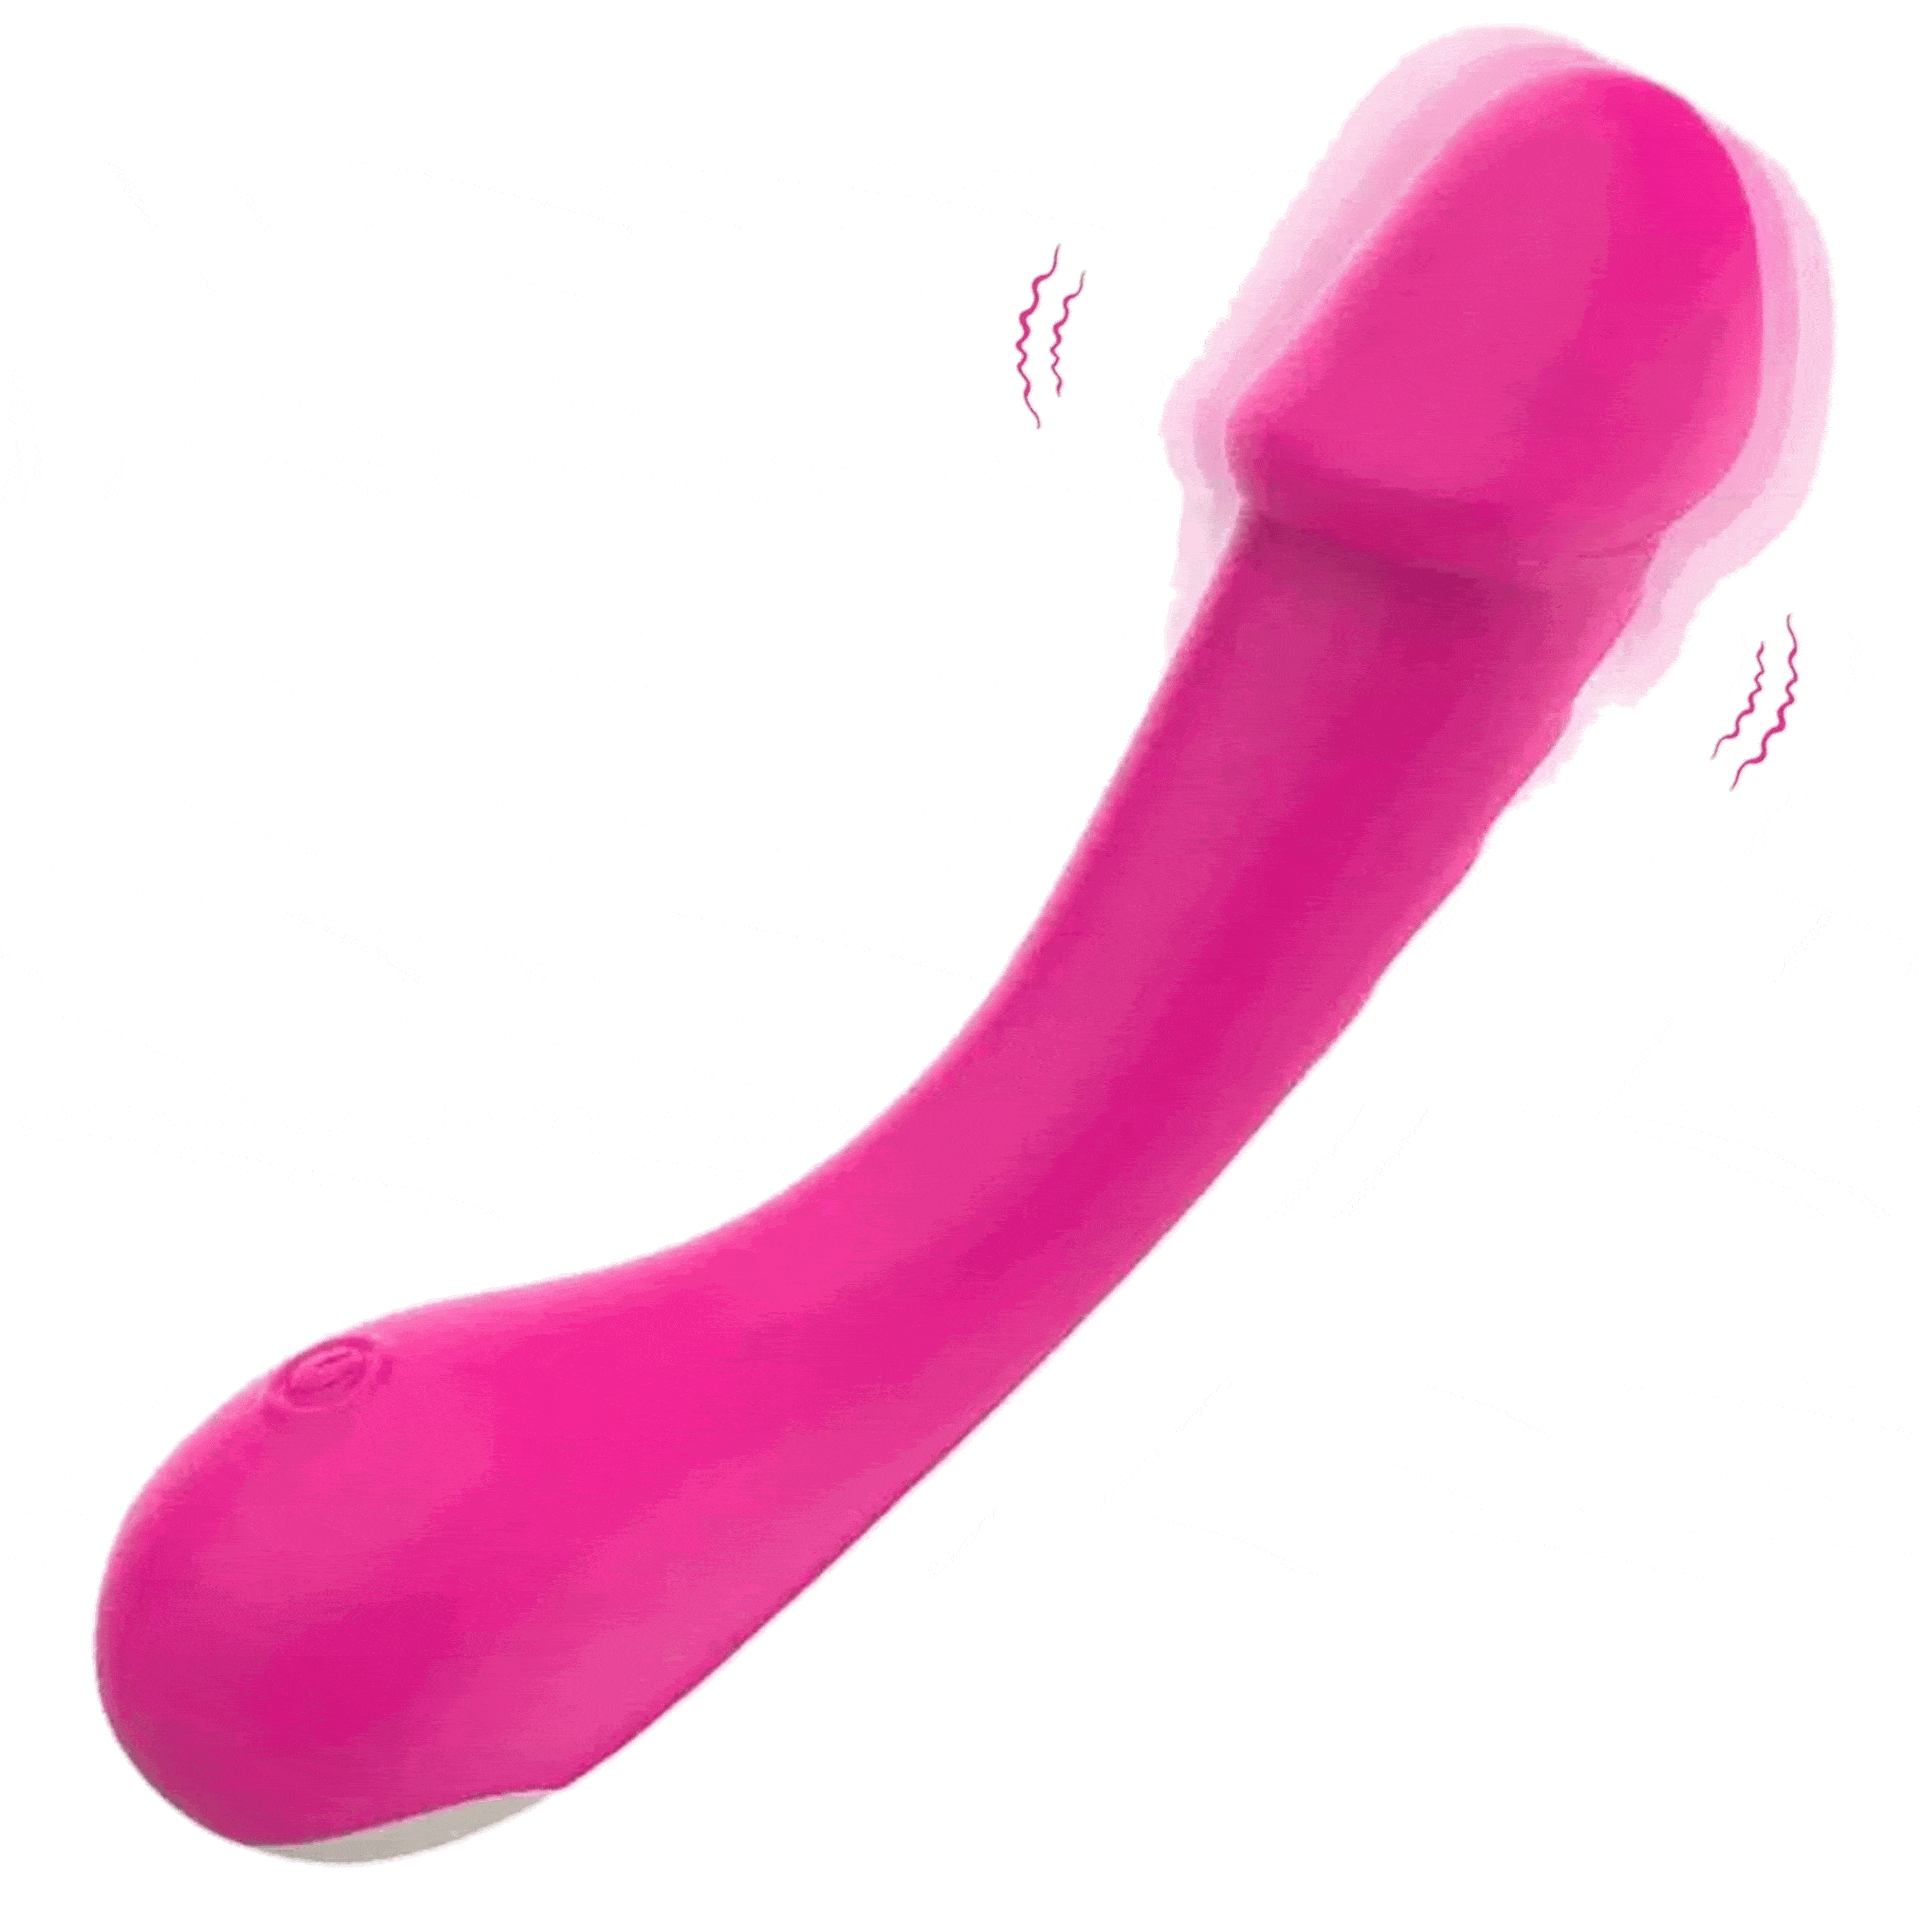 Adult Luxury the Worlds number 1 sex shop. Shop now Romeo Orgasmic Silent Satisfier Vibrator.